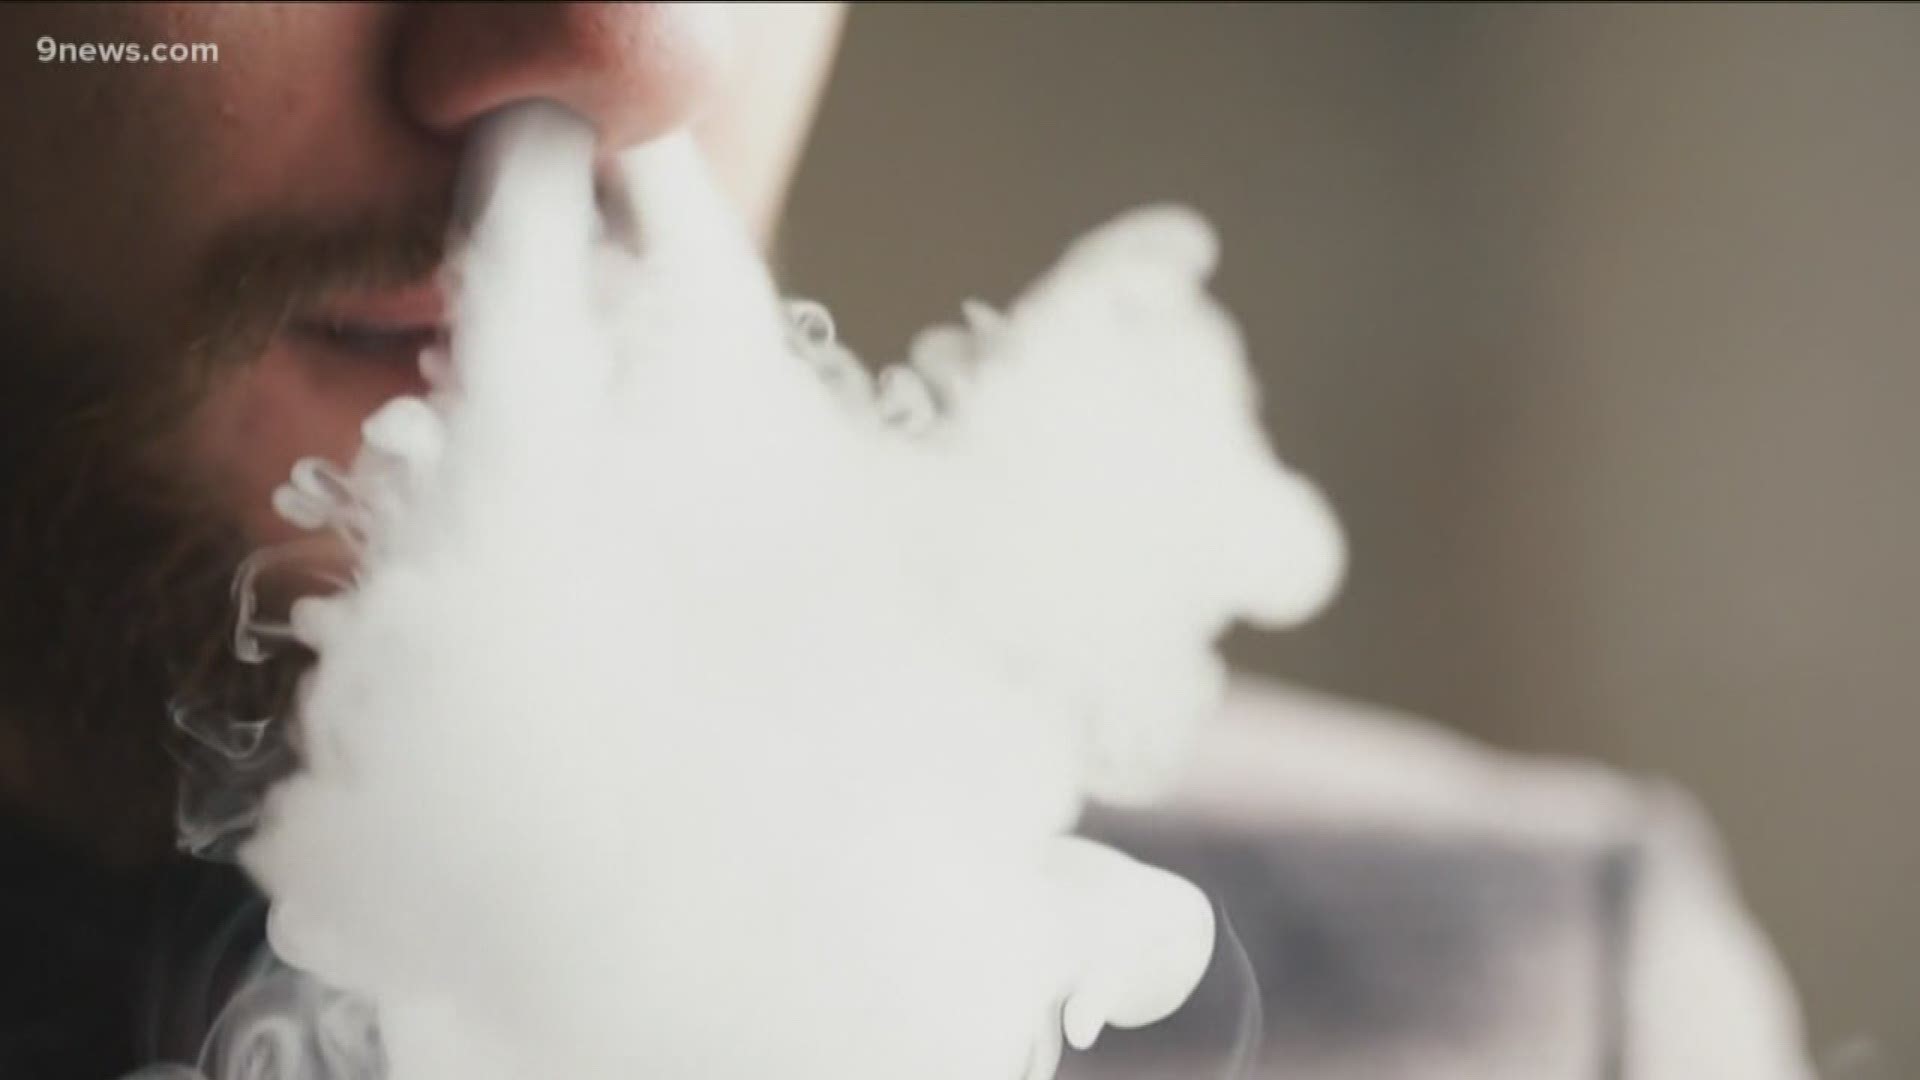 As public health and school officials raise alarms about illness and deaths related to vaping, data reveals vaping is an epidemic across the state.